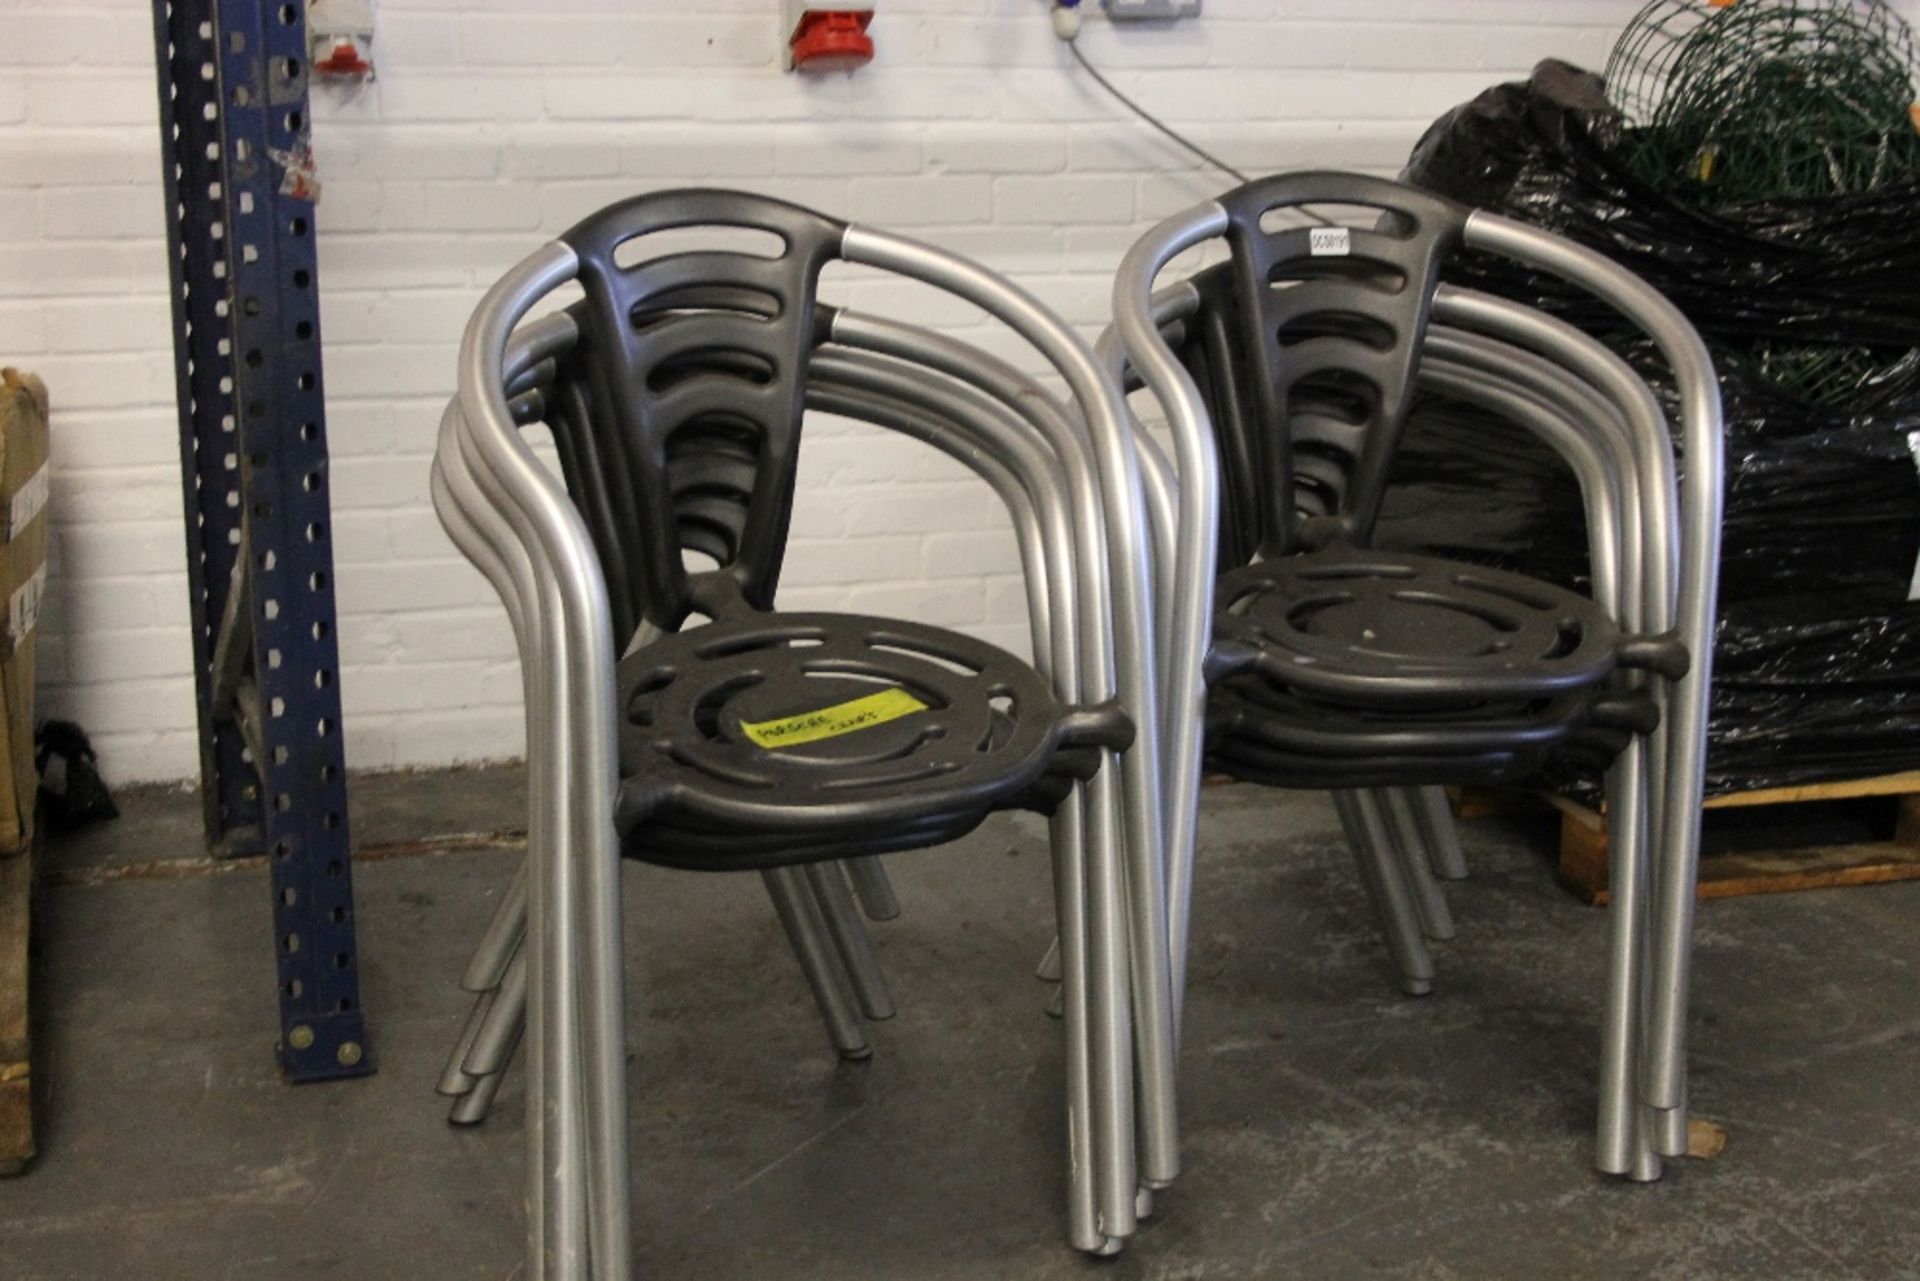 4 Chrome Porsche Designed Chairs – NO VAT Look great in any Car Sales Reception/ Office